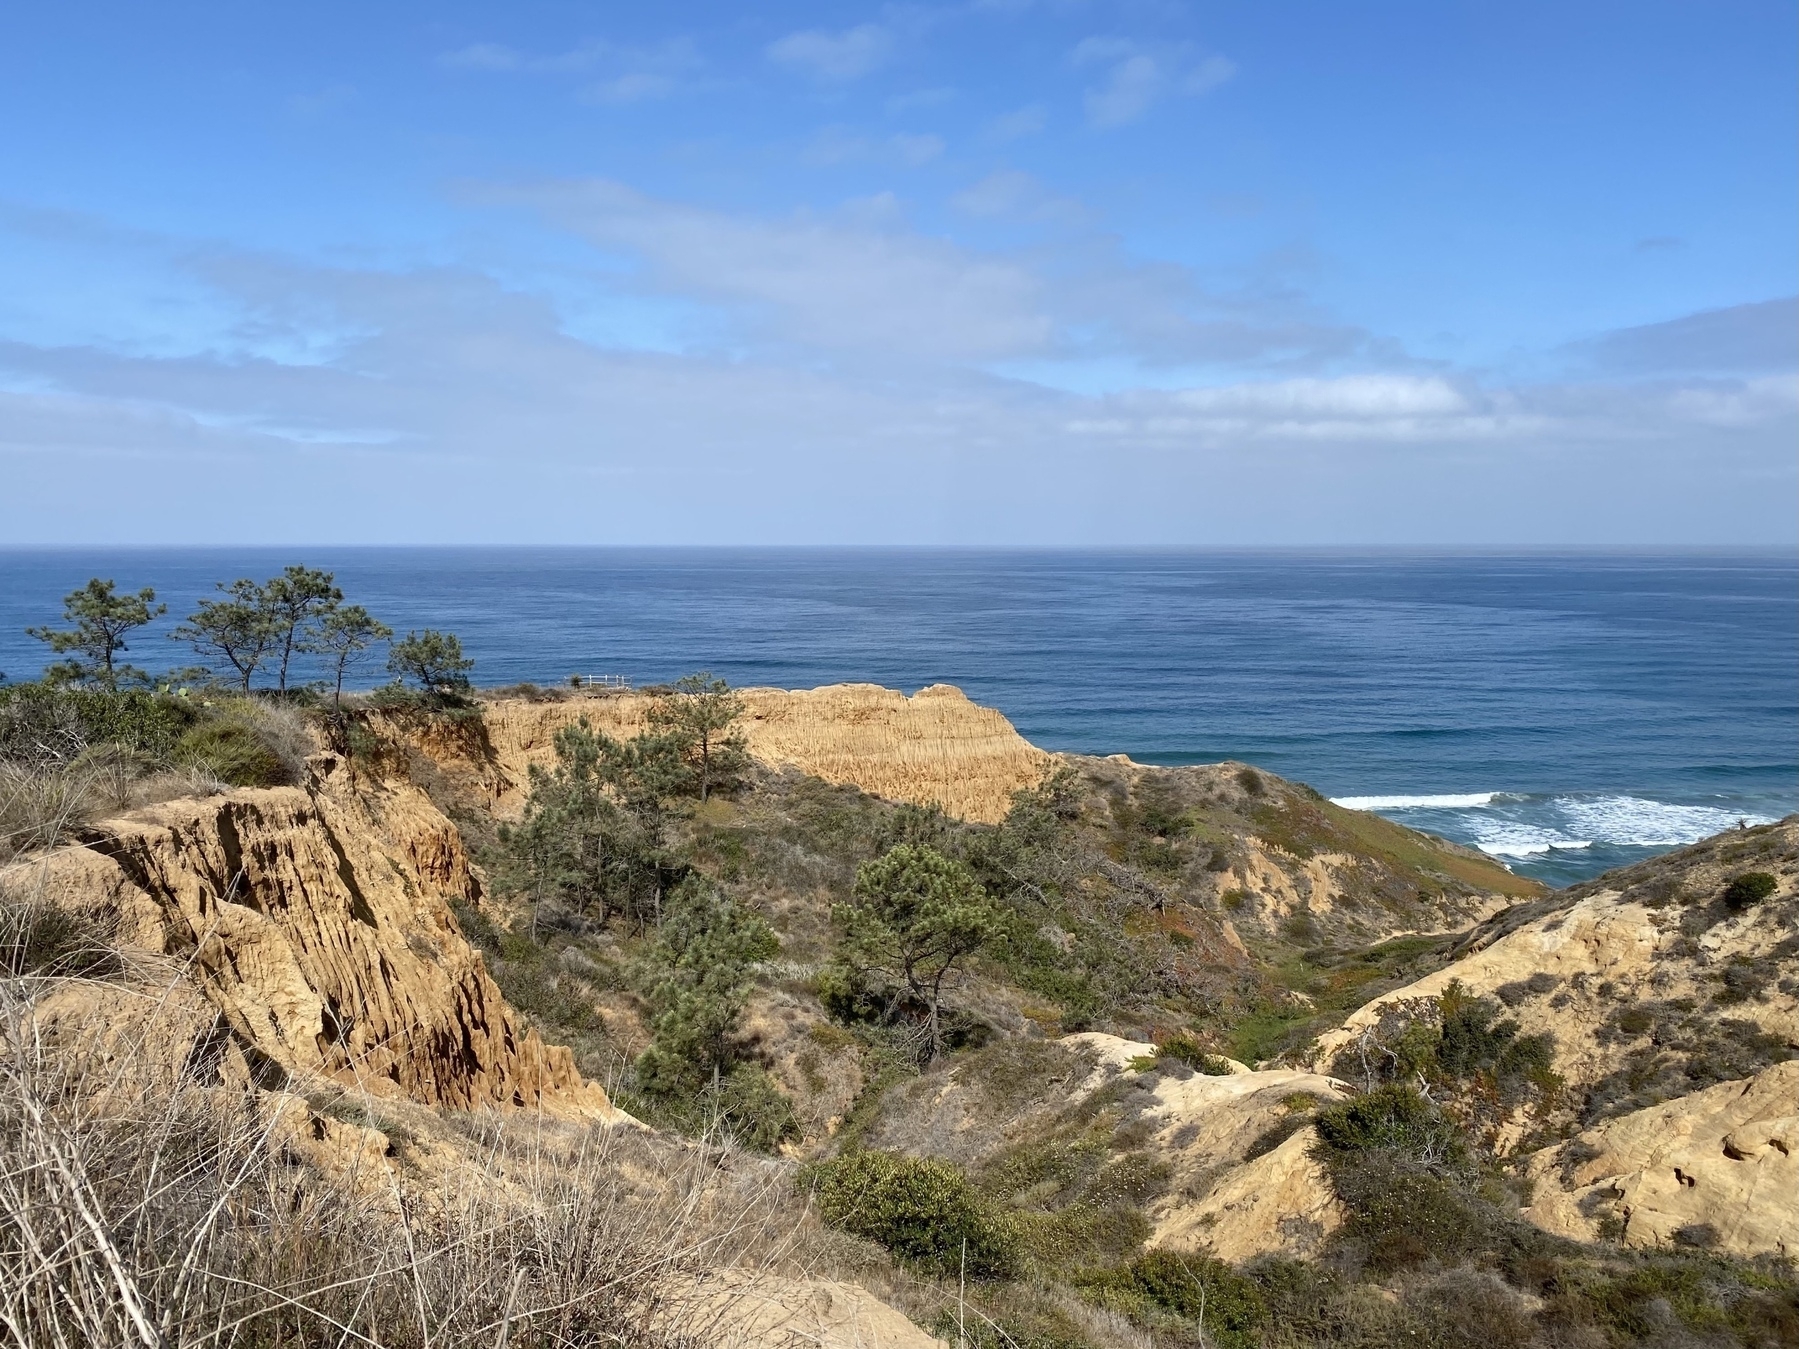 View of a canyon leading down to the ocean.